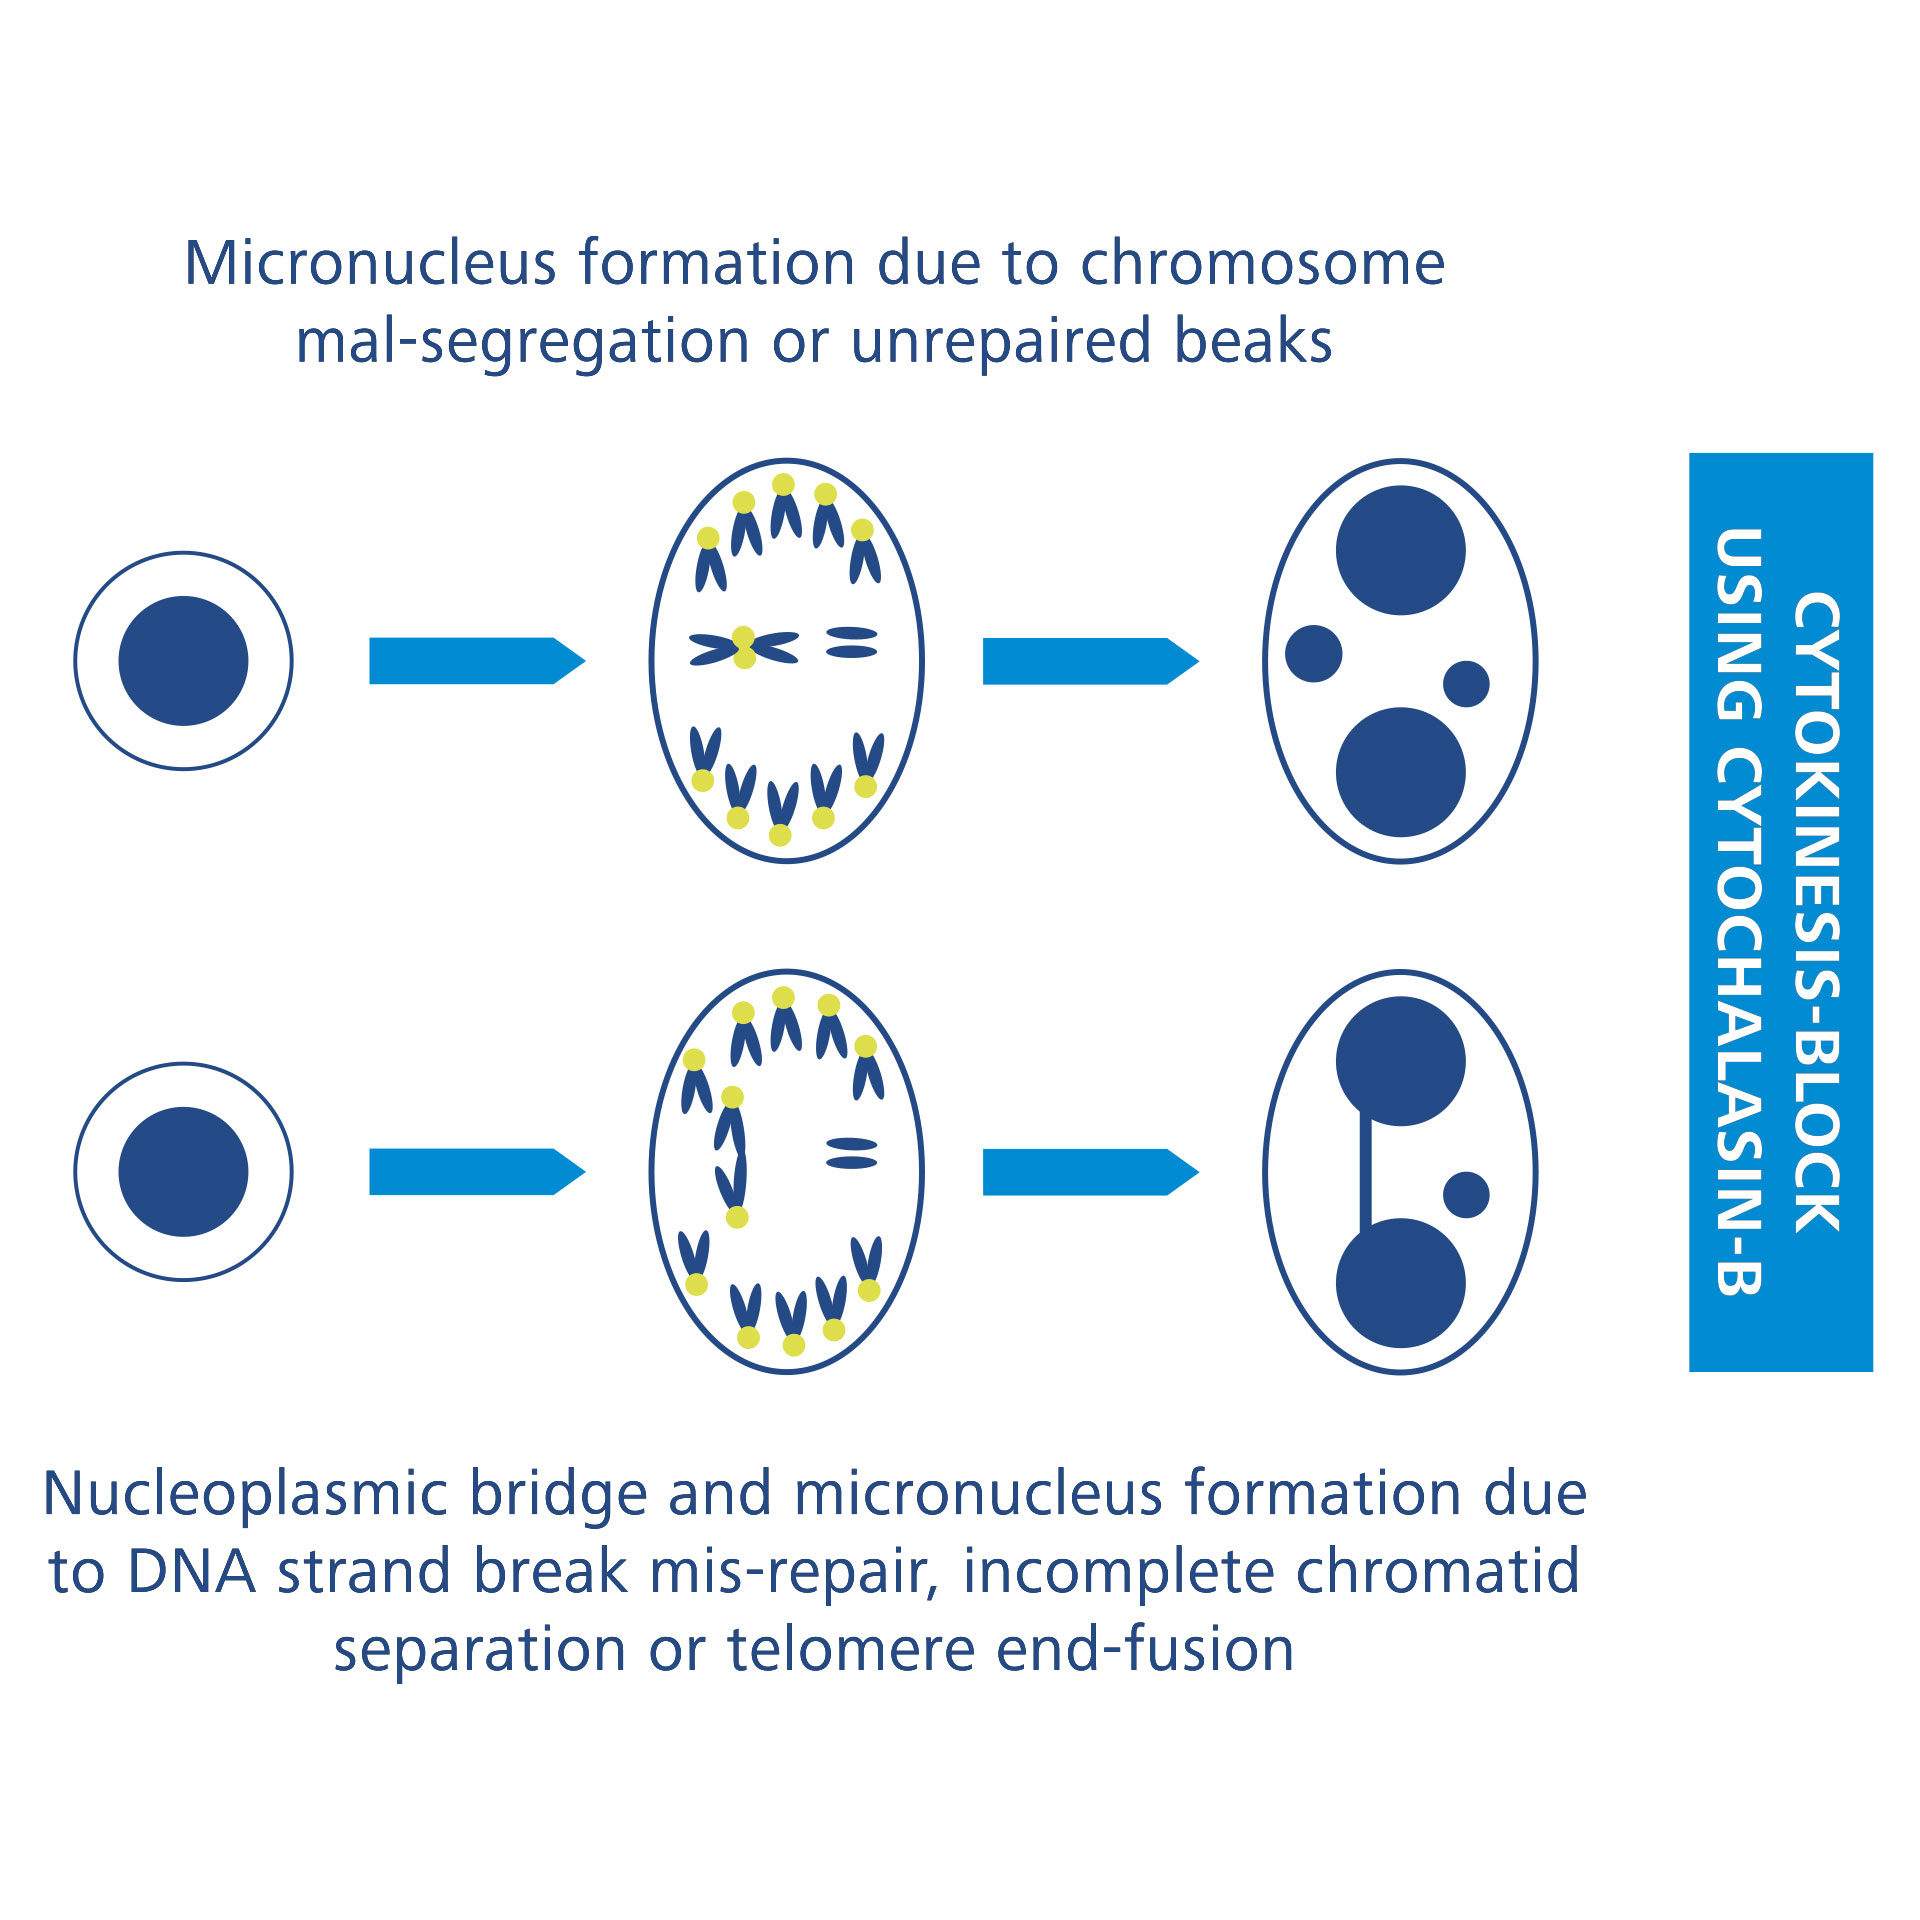 Mechanisms of micronucleus formation during mitosis